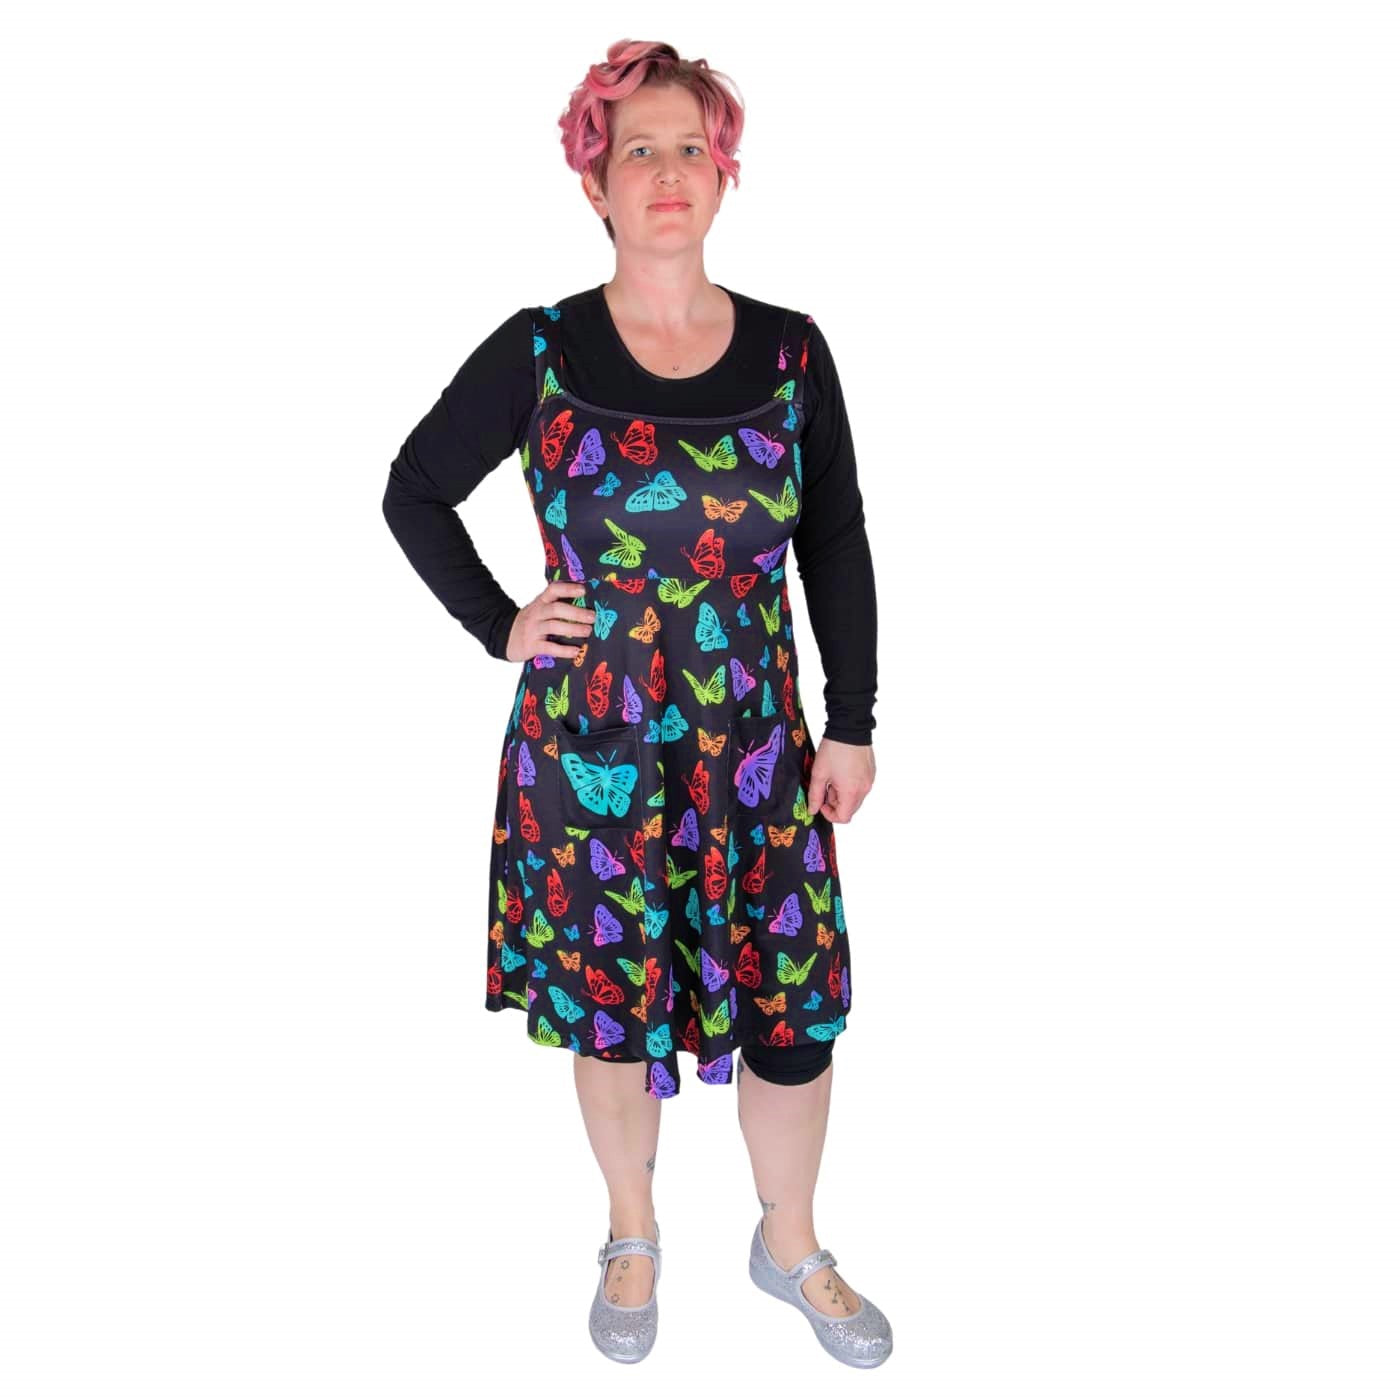 Kaleidoscope Pinafore by RainbowsAndFairies.com.au (Monarch Butterfly - Butterflies - Dress With Pockets - Pinny - Rainbow - Vintage Inspired - Kitsch) - SKU: CL_PFORE_KSCOP_ORG - Pic-05